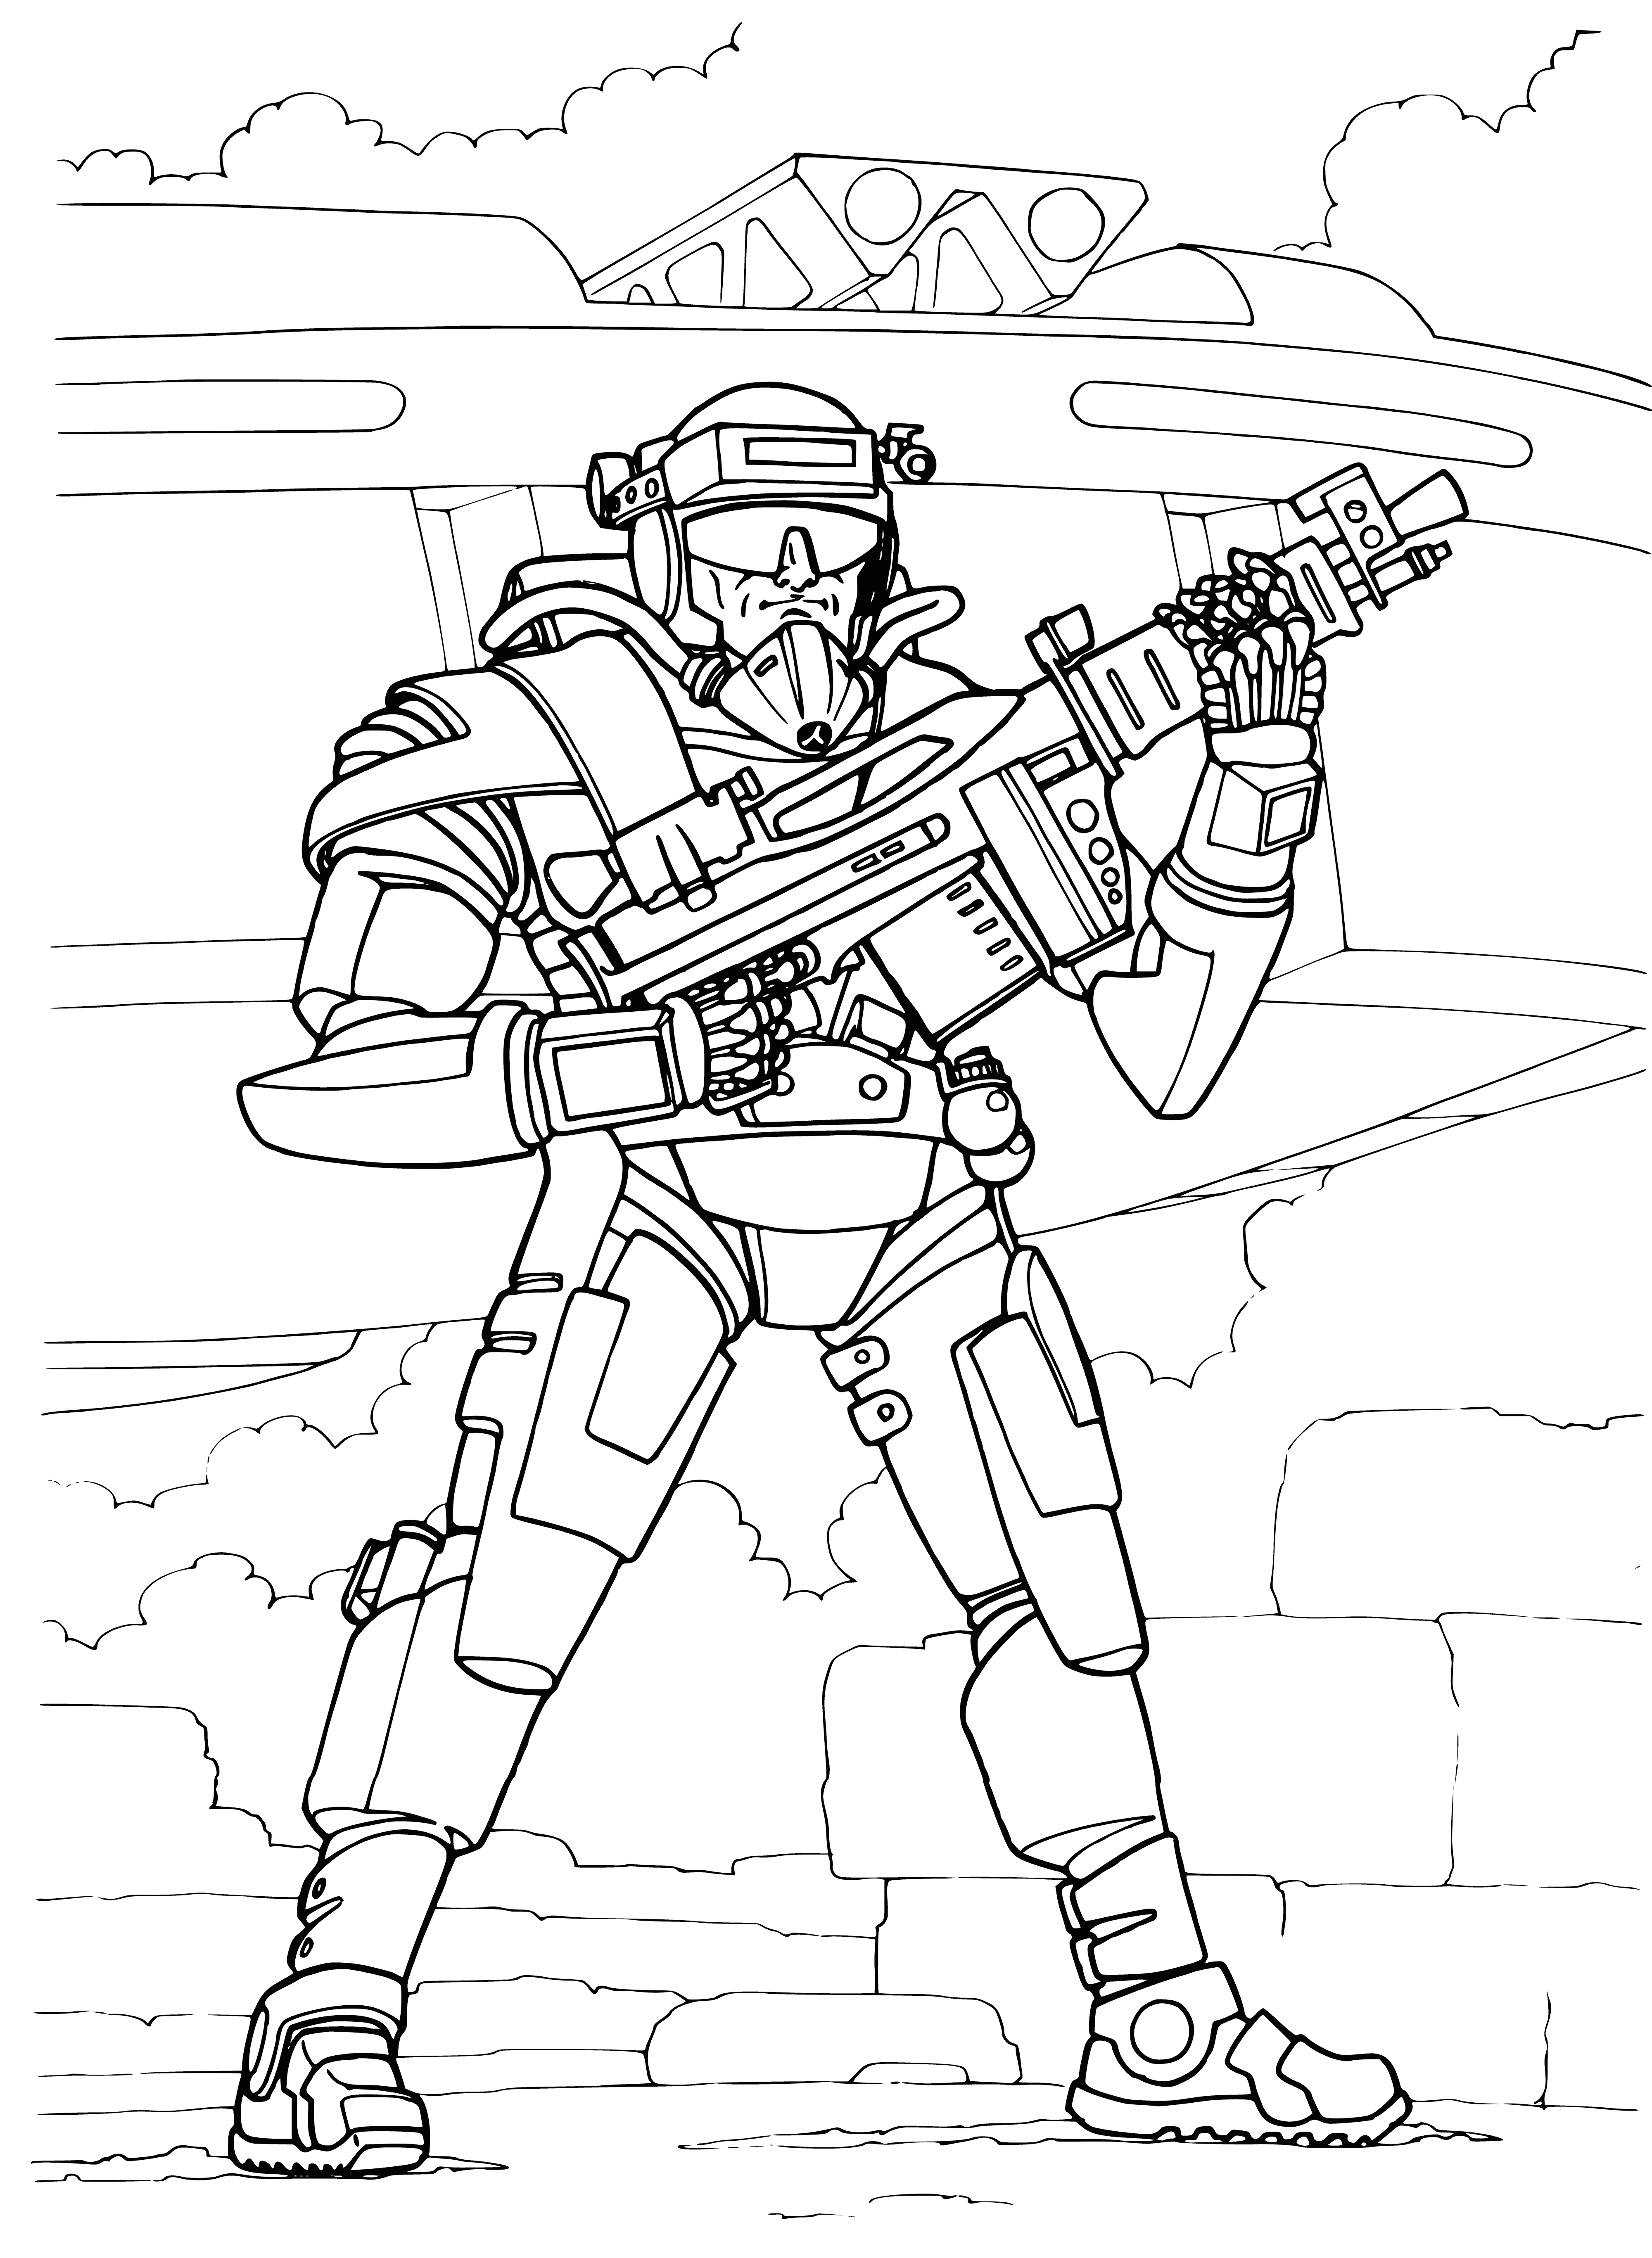 Fortune soldier of the future coloring page